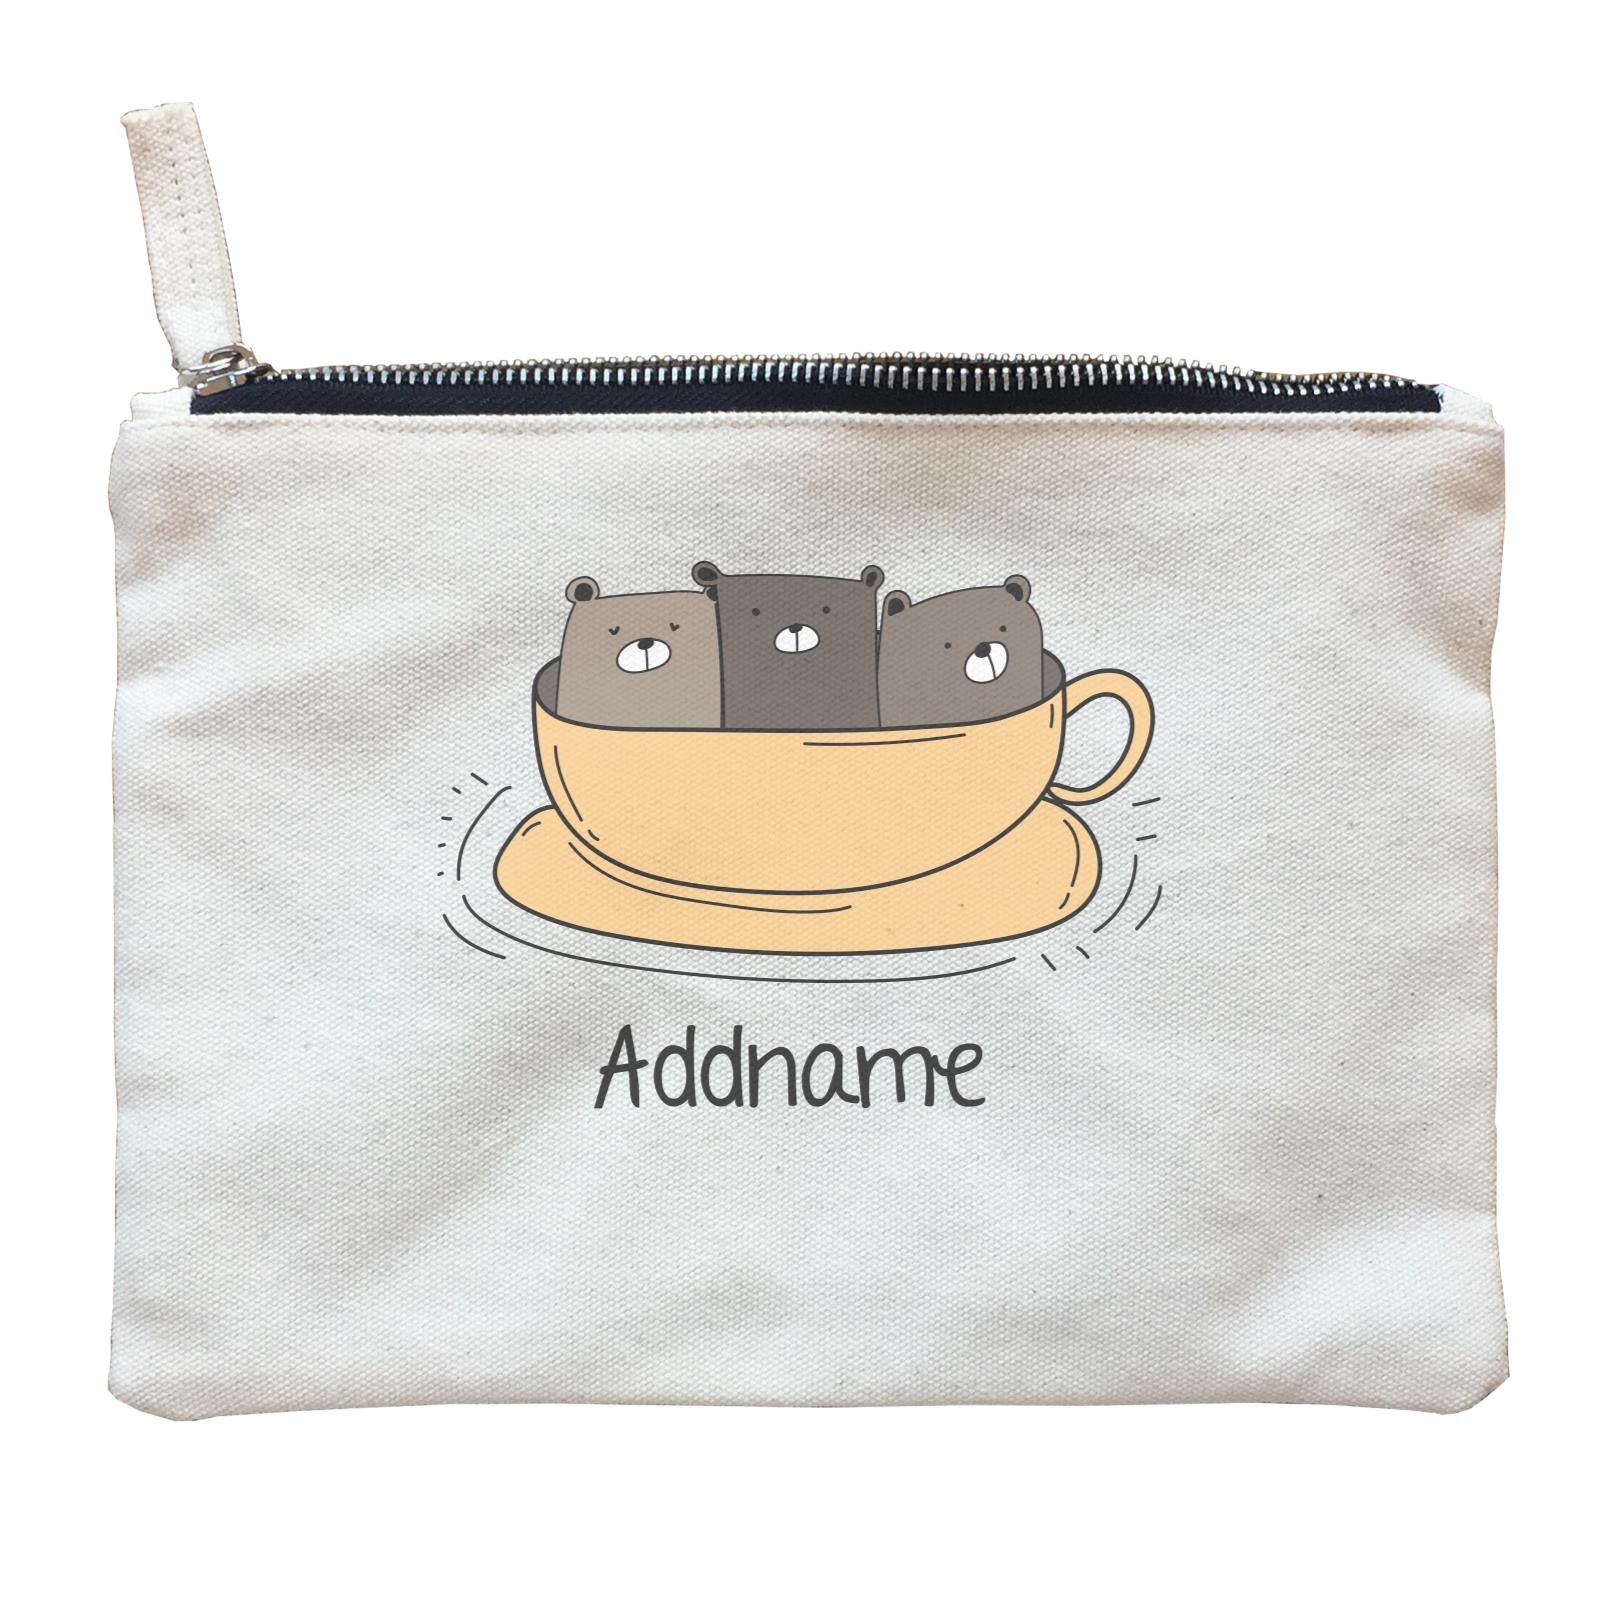 Cute Animals And Friends Series Hello Bear Coffee Cup Group Addname Zipper Pouch